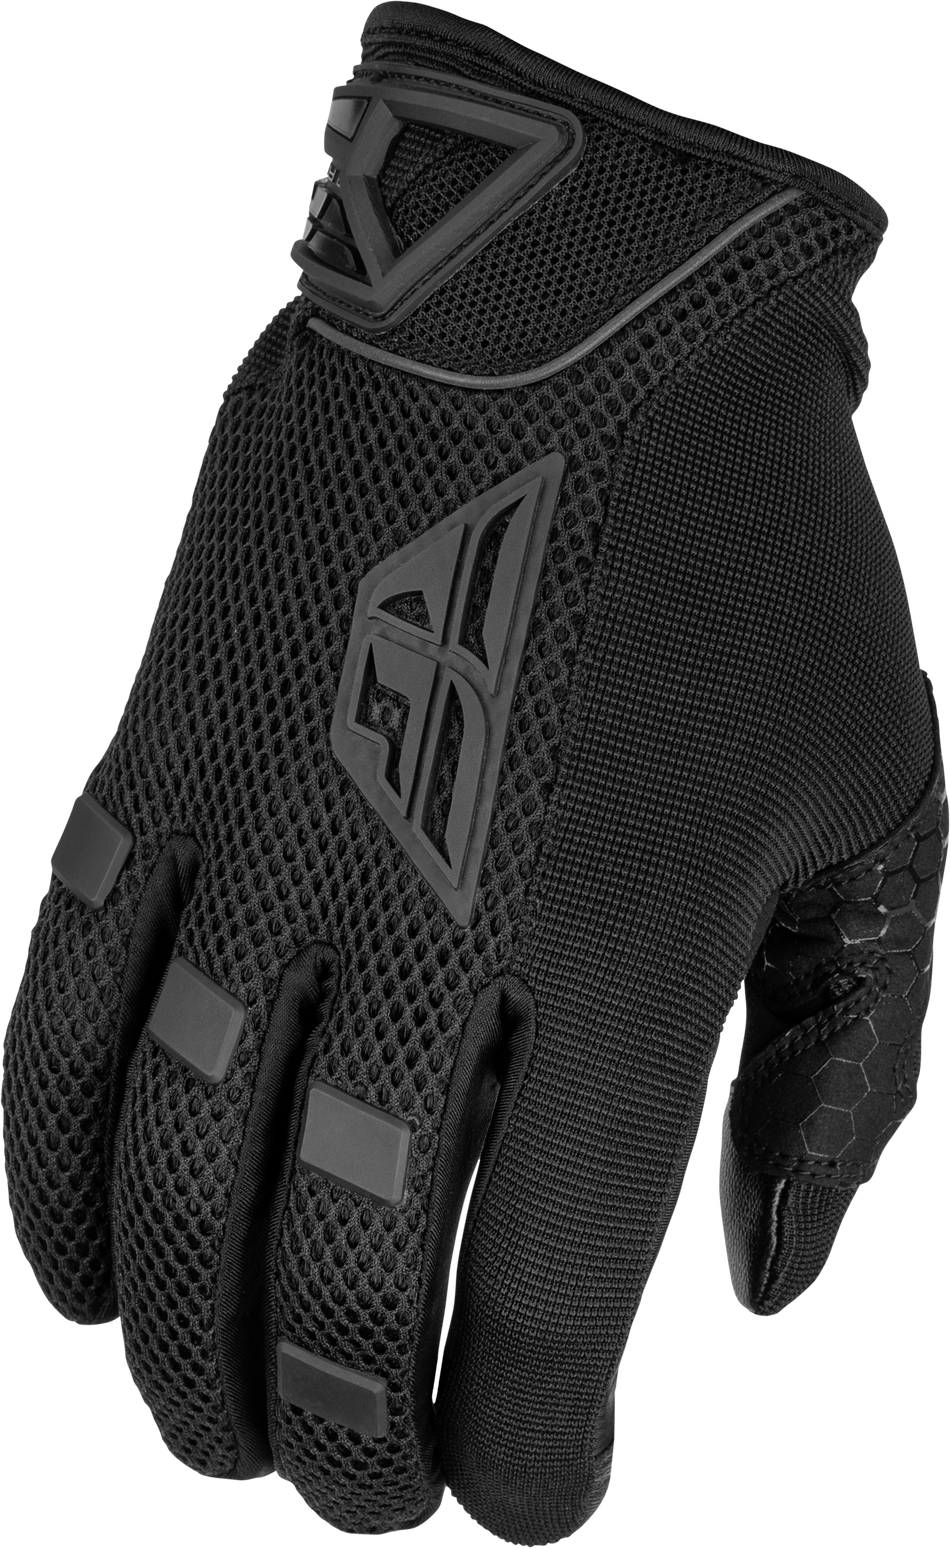 FLY RACING Coolpro Glove Black Lg 476-4024L